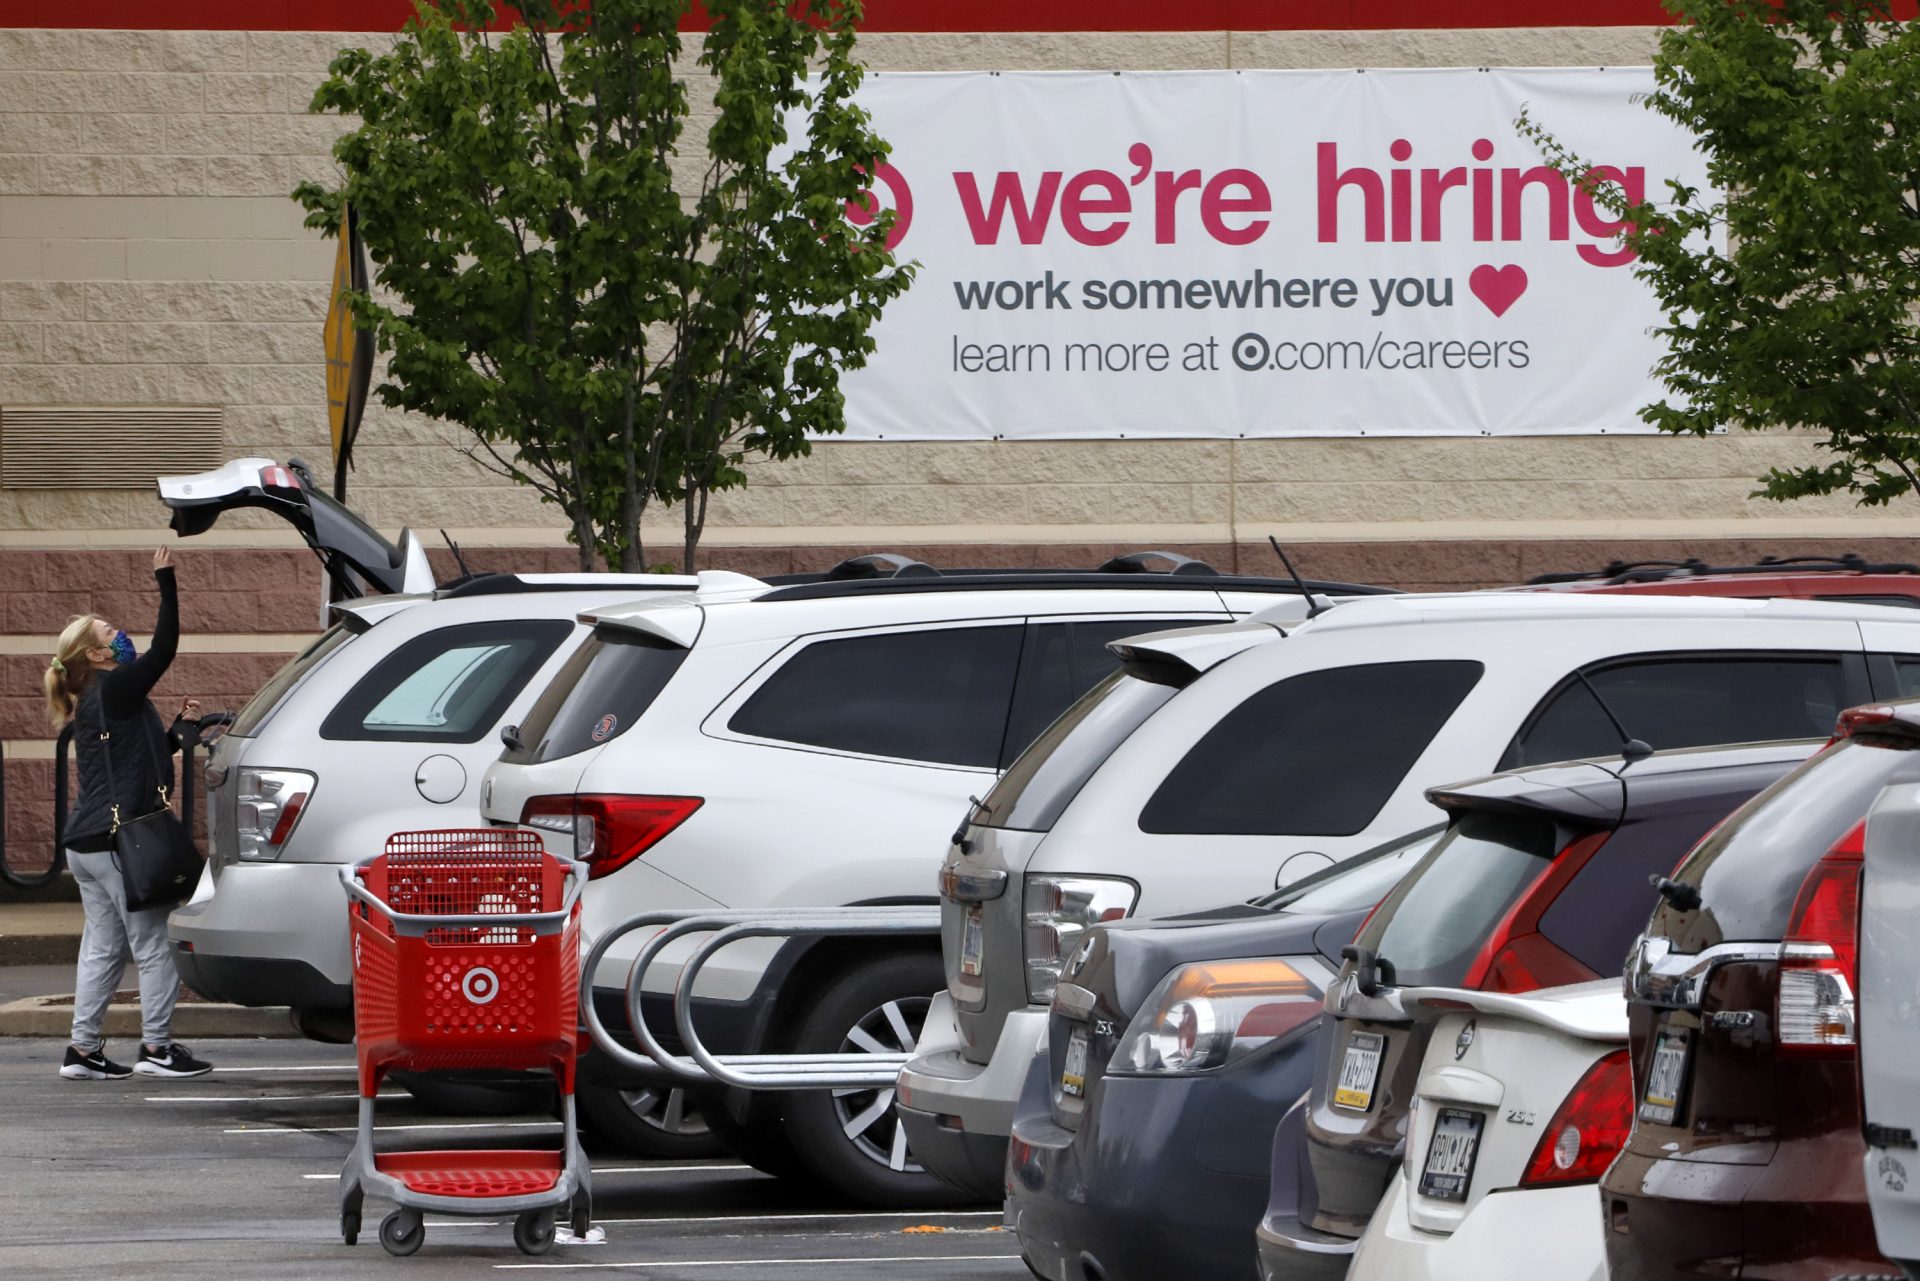 A shopper loads her car after shopping at a Target store in Robinson Township, Pa., Wednesday, May 6, 2020.